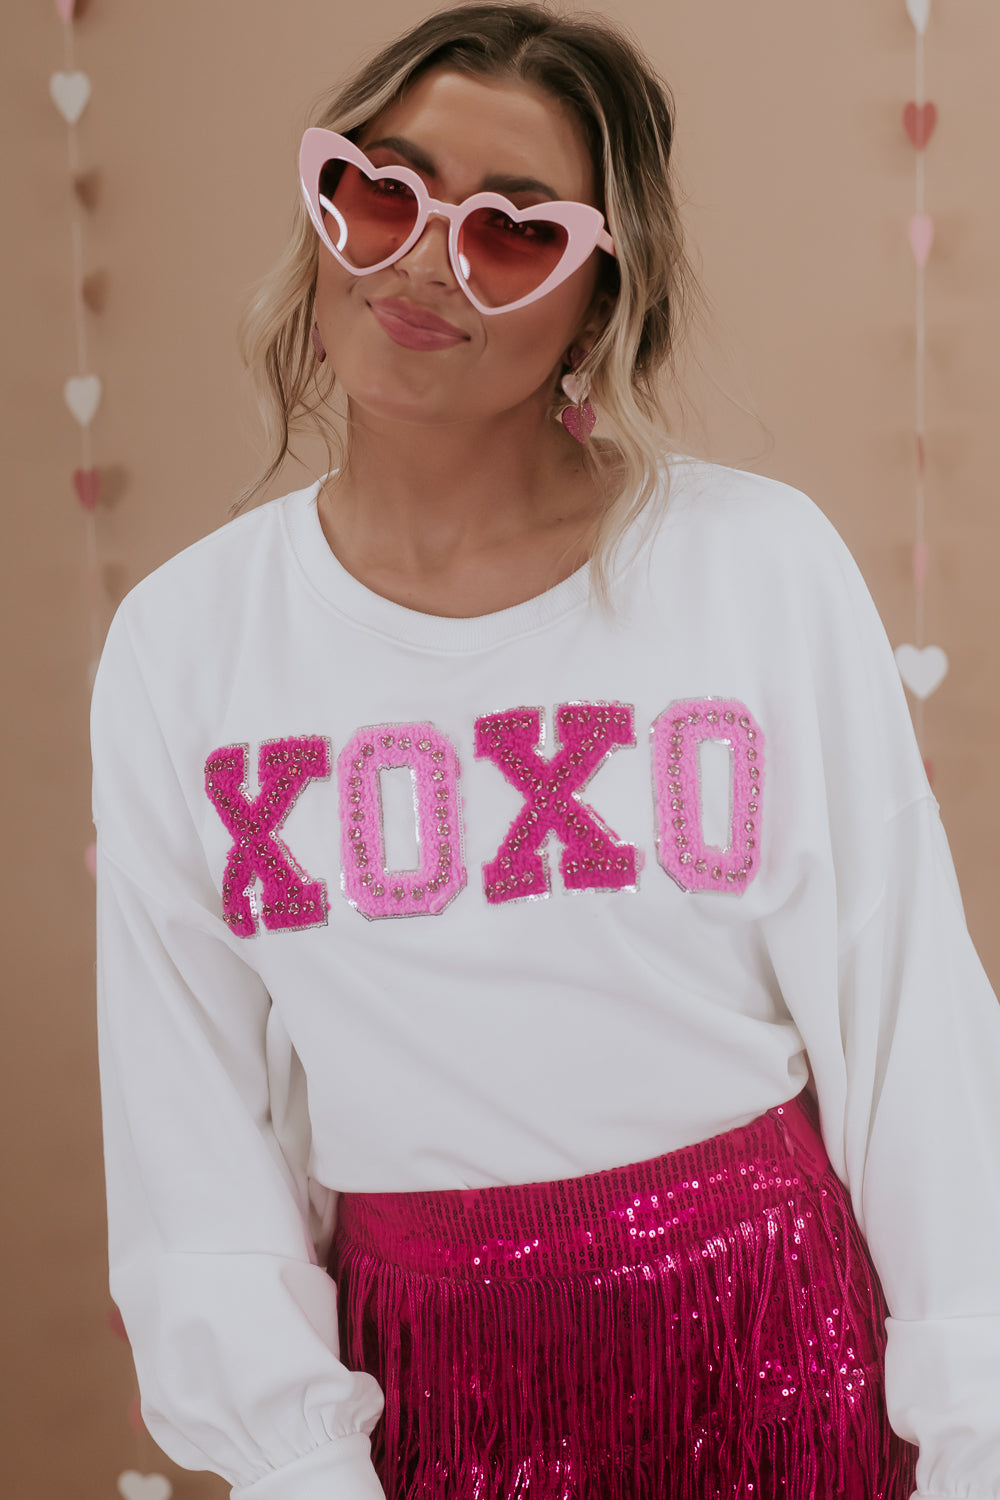 XOXO patched sweater, V-day graphic, Cute v-day look